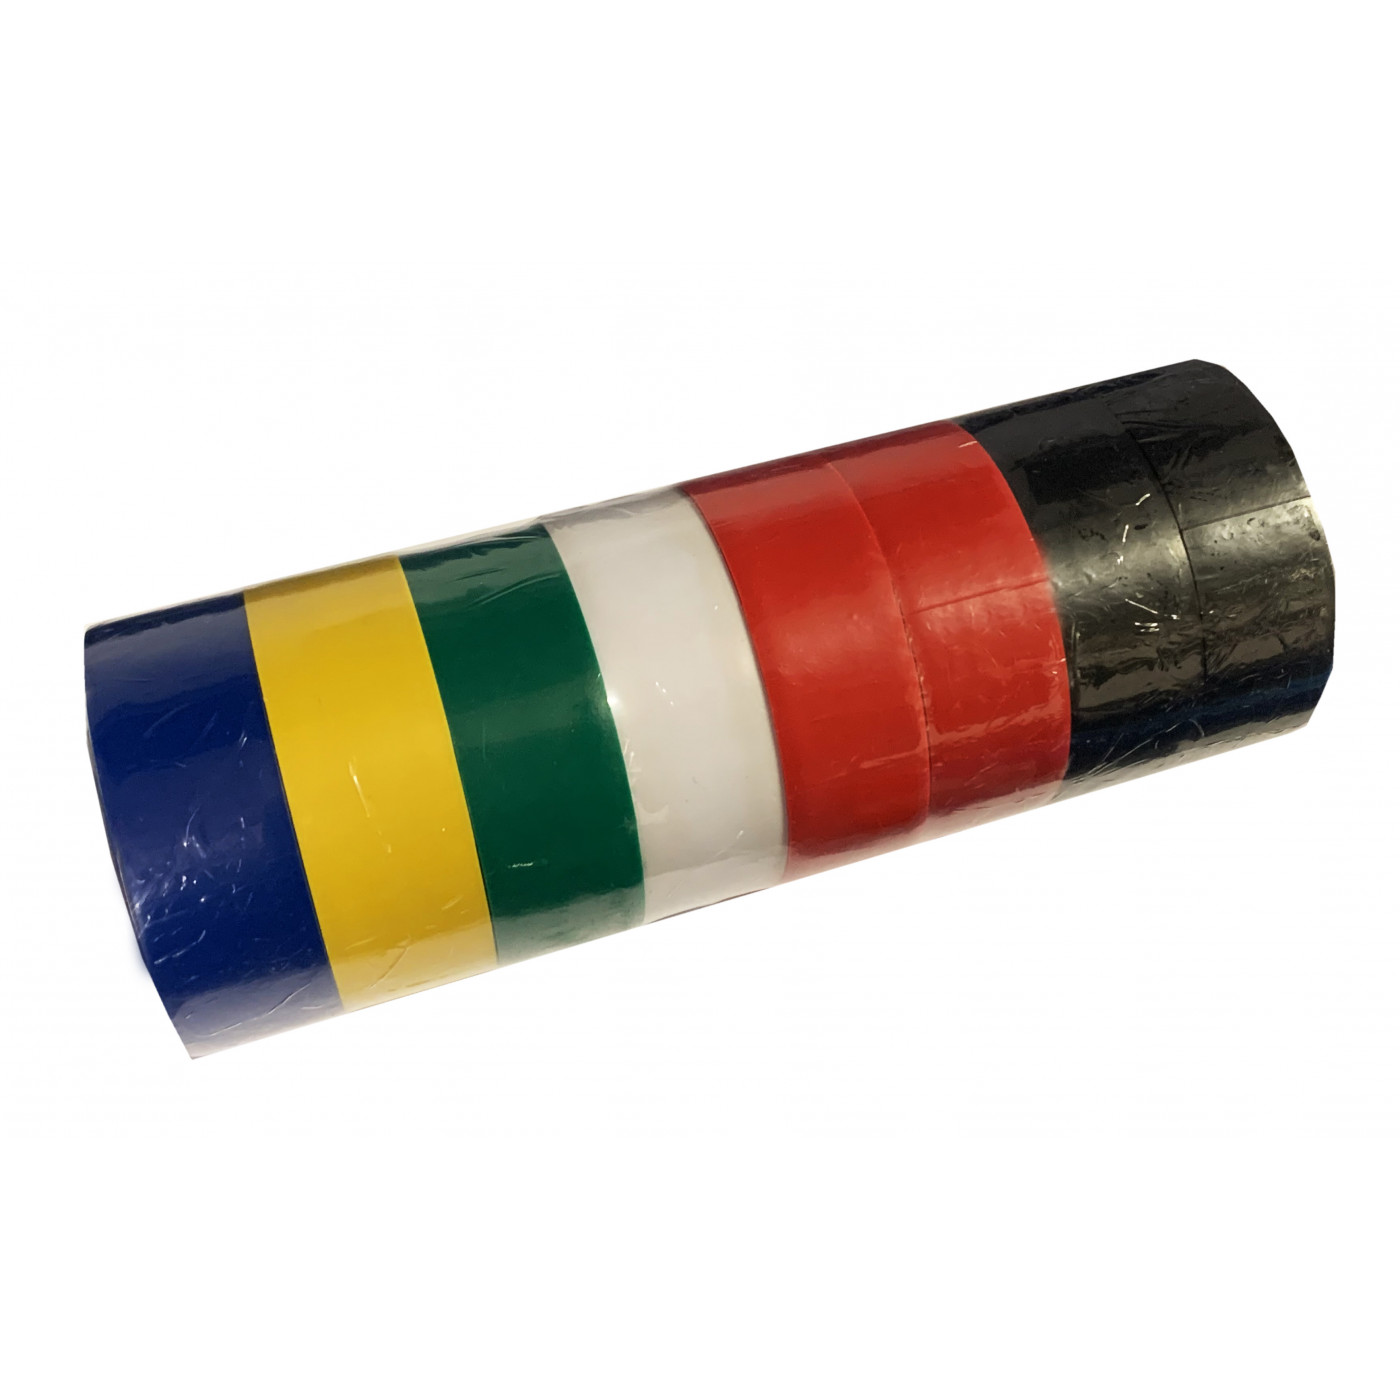 Set of 8 rolls of insulation tape (1.8 cm wide, total 40 meters